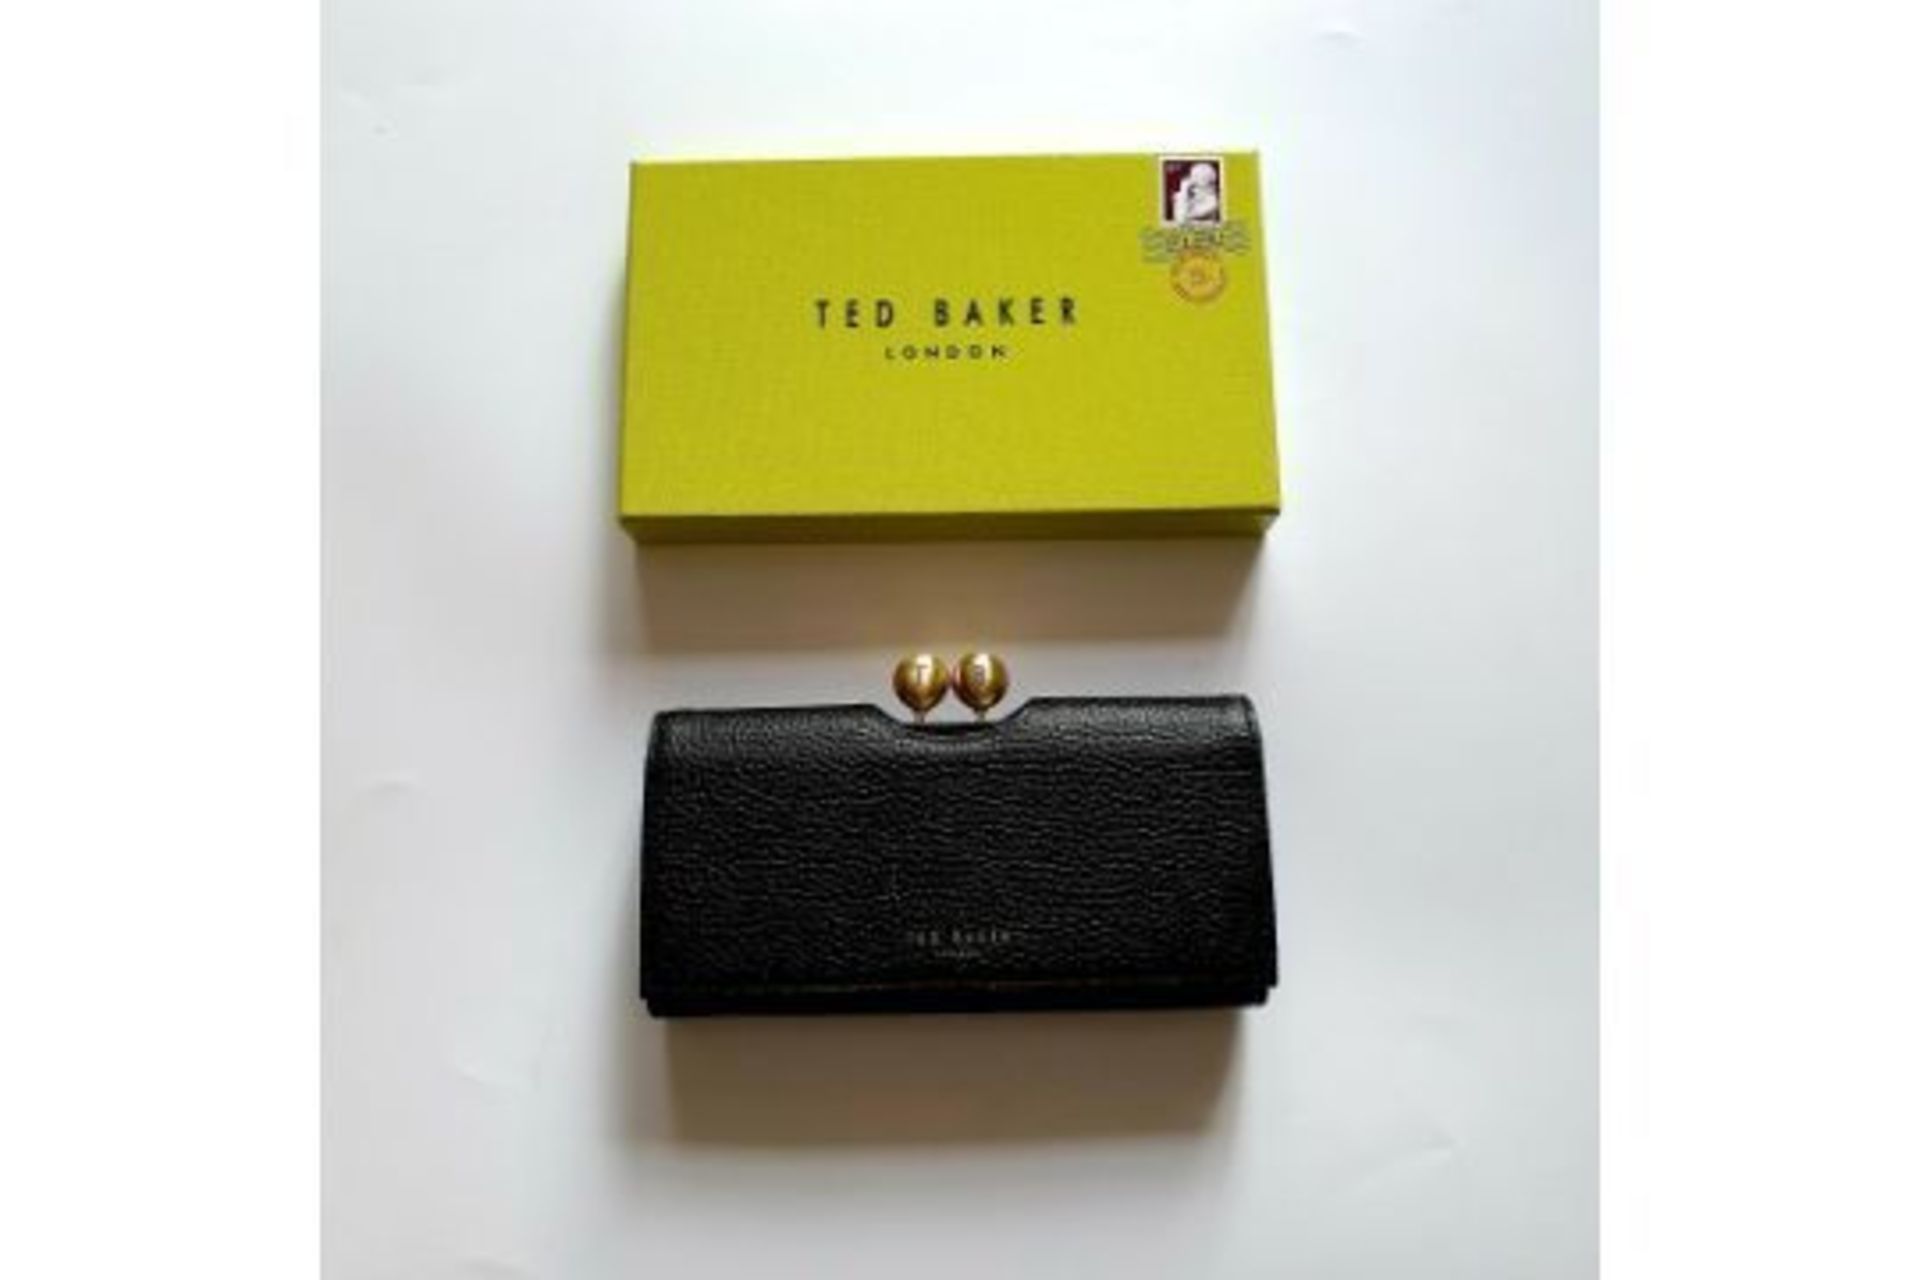 BRAND NEW TED BAKER BLACK SOLANGE TWISTED CRYSTAL BOBBLE MATINEE PURSE (1309) RRP £99 - 11